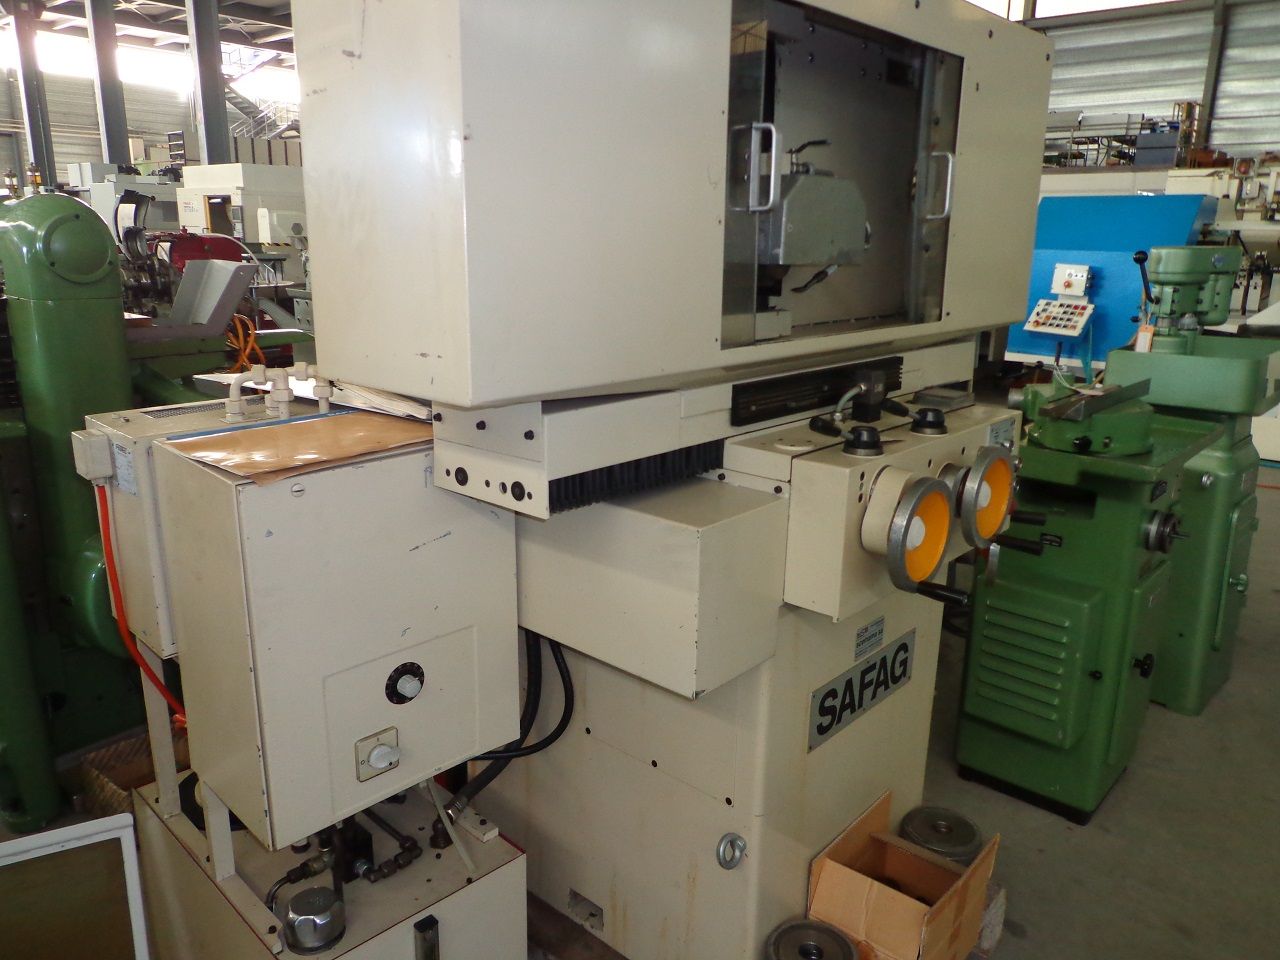 Surface Grinders/SURFACE GRINDING MACHINE SAFAG TYPE 3025 HV